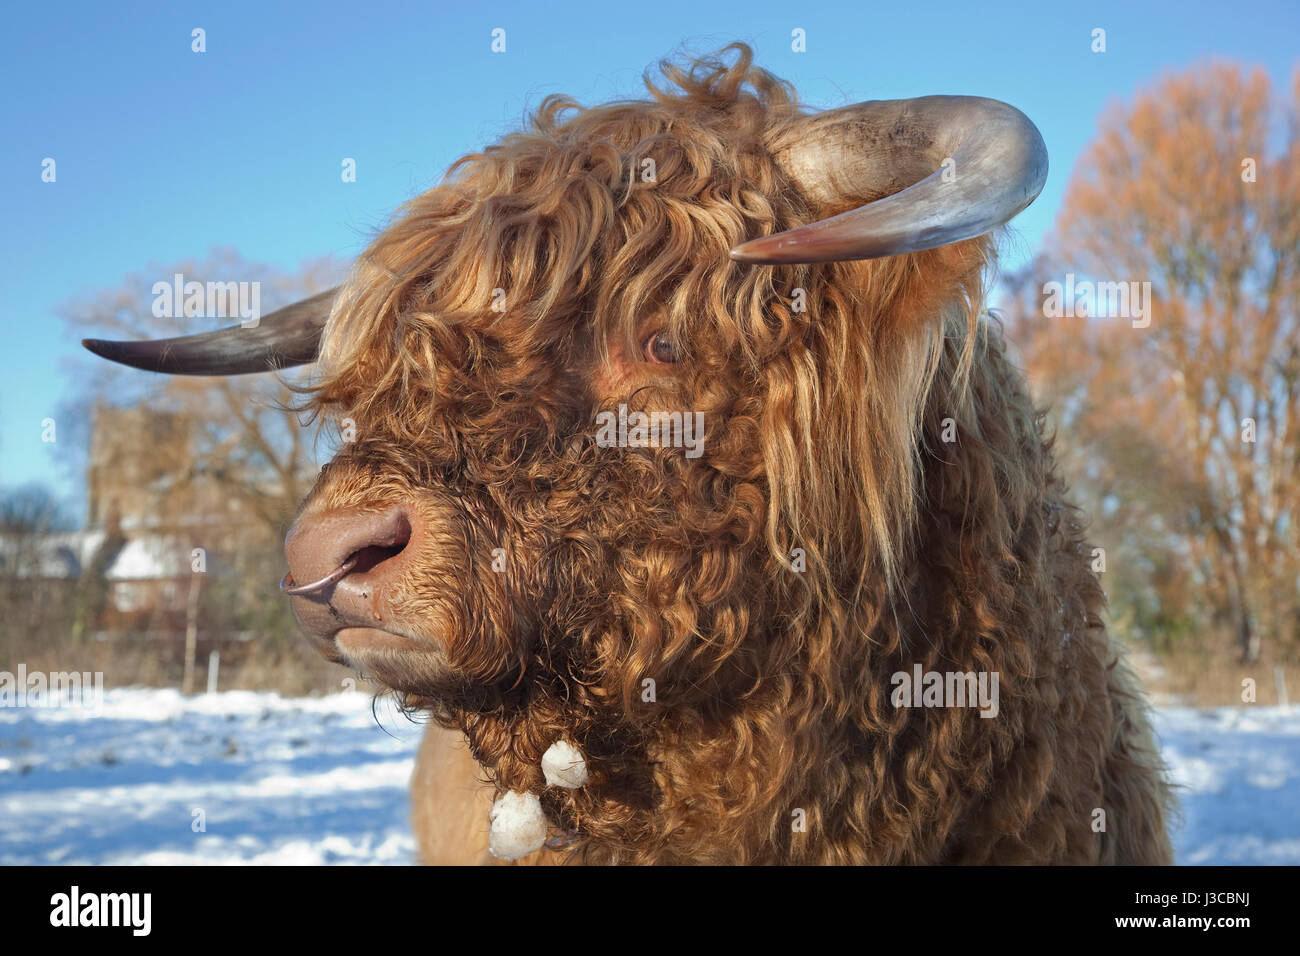 Highland Cattle in snow Stock Photo